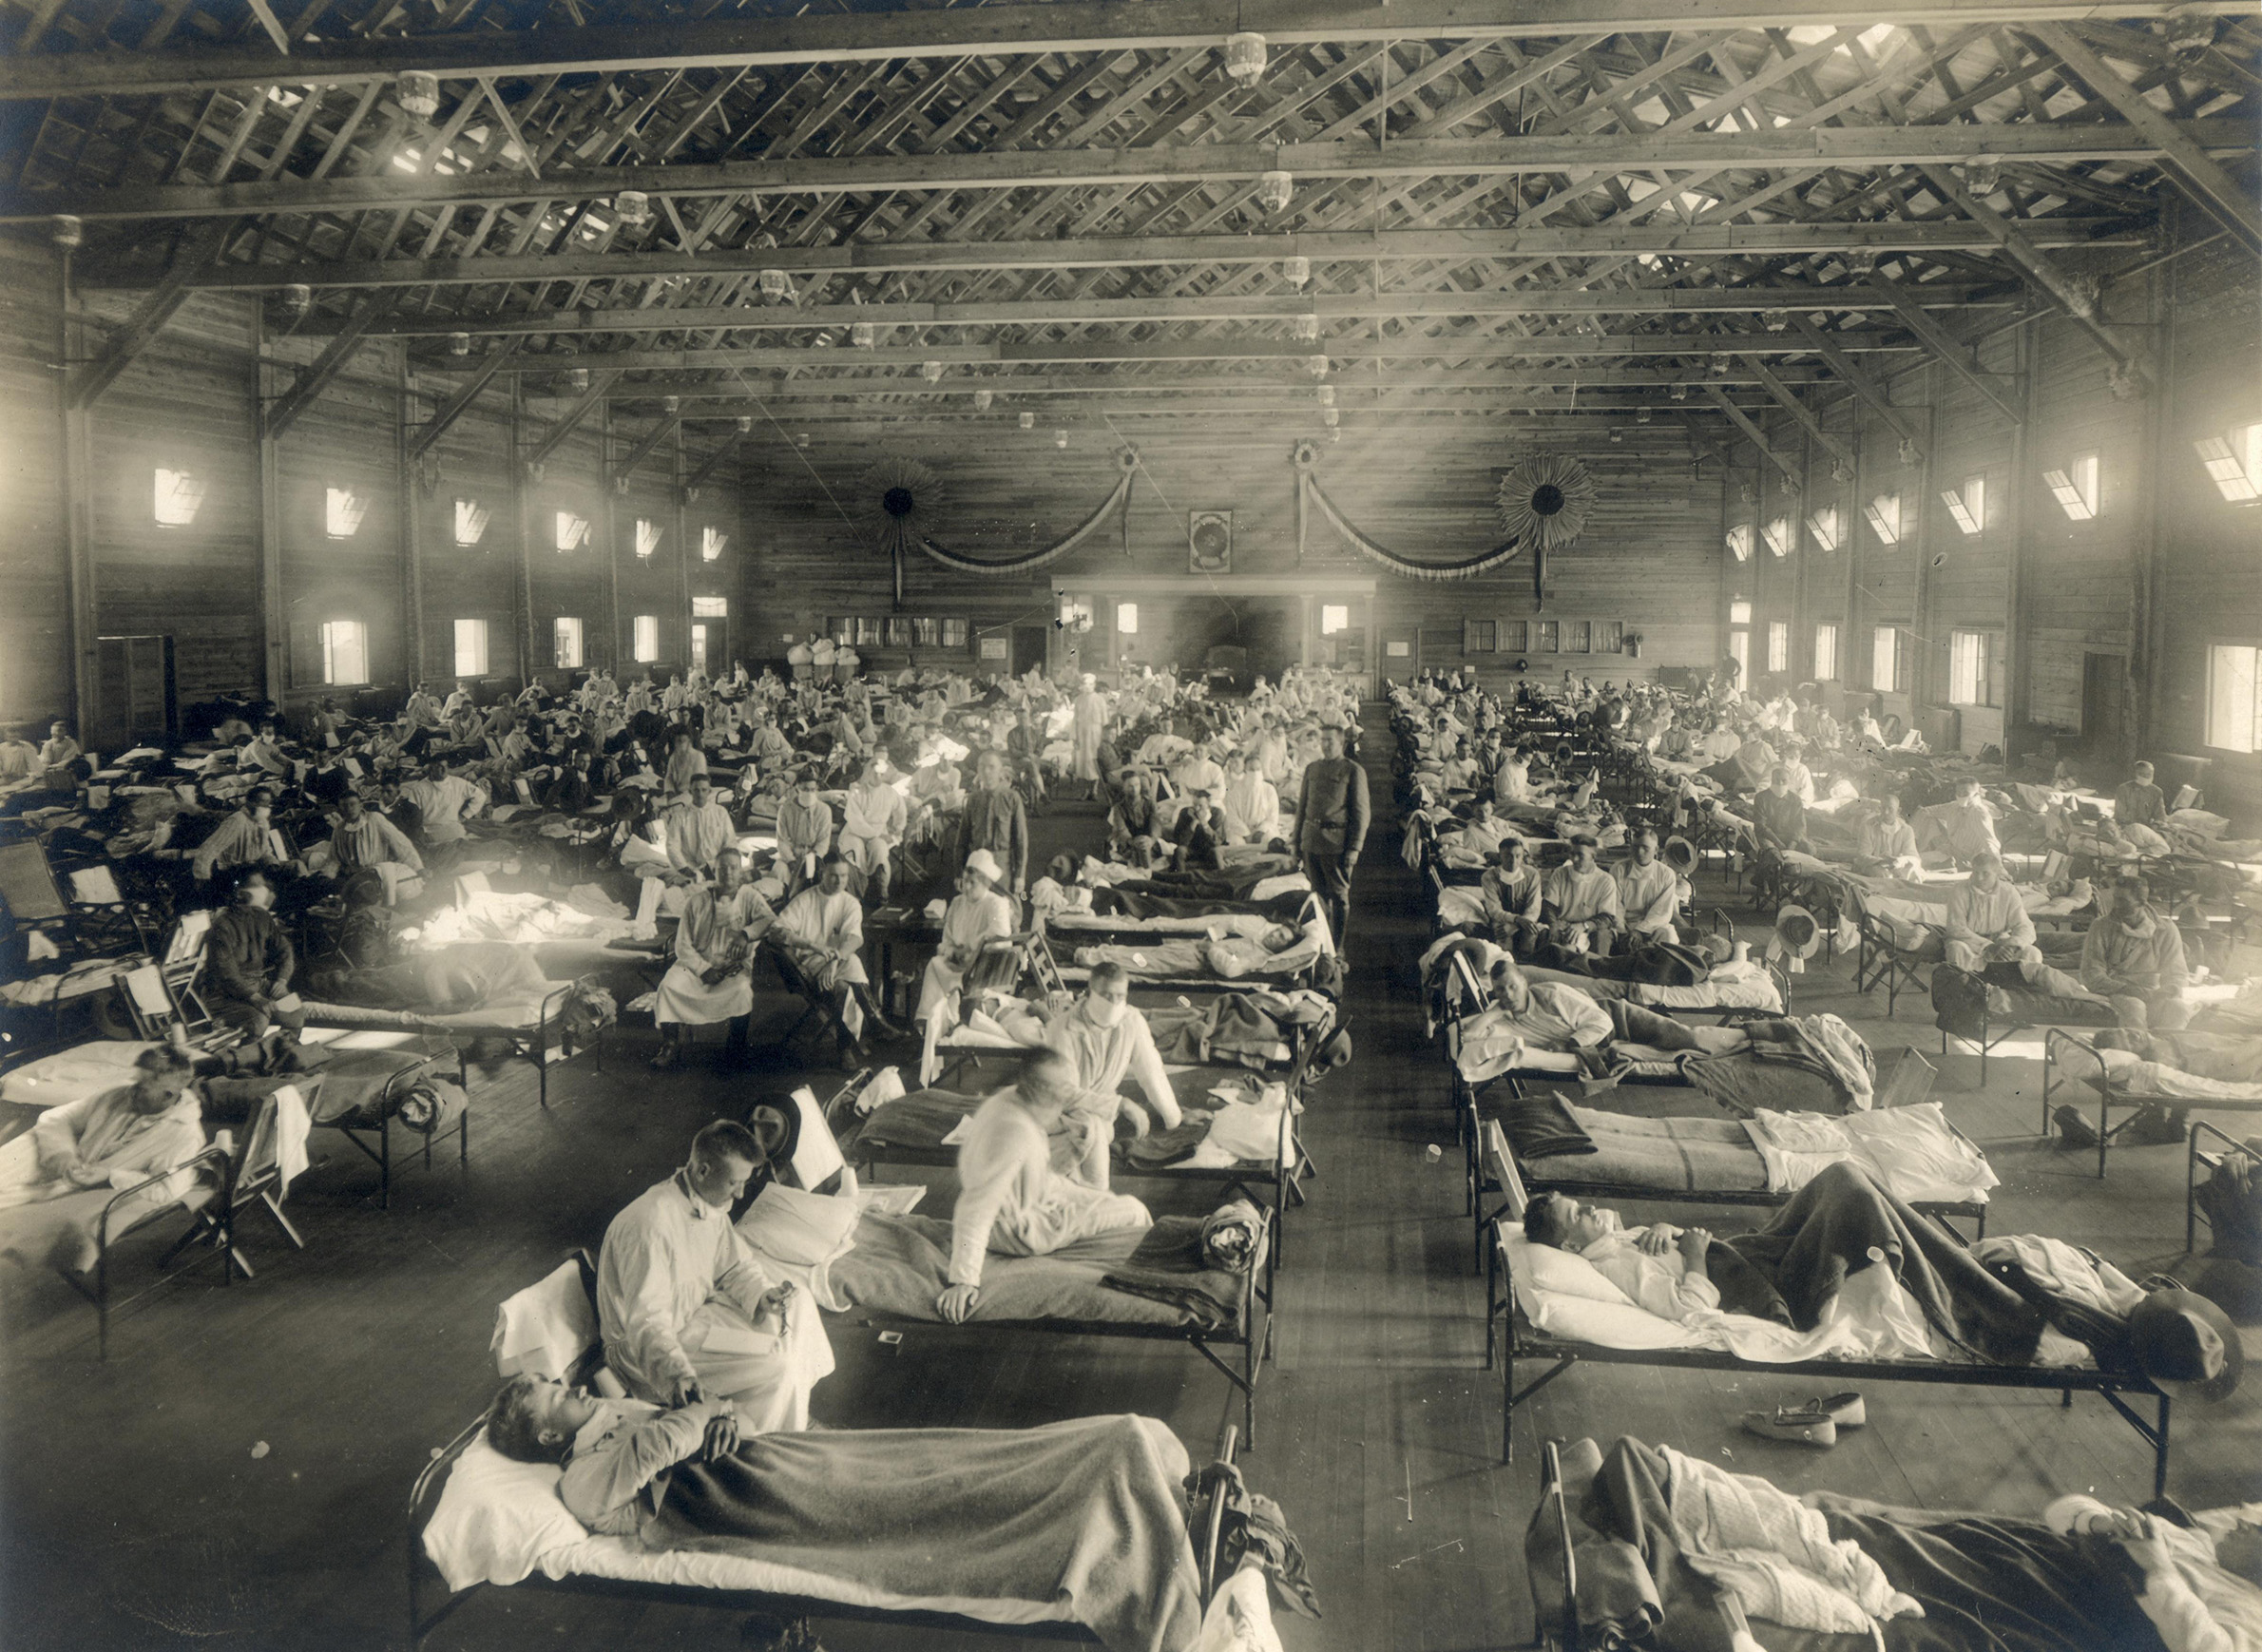 WisContext: What Made The Great Flu Pandemic Of 1918 So Momentous